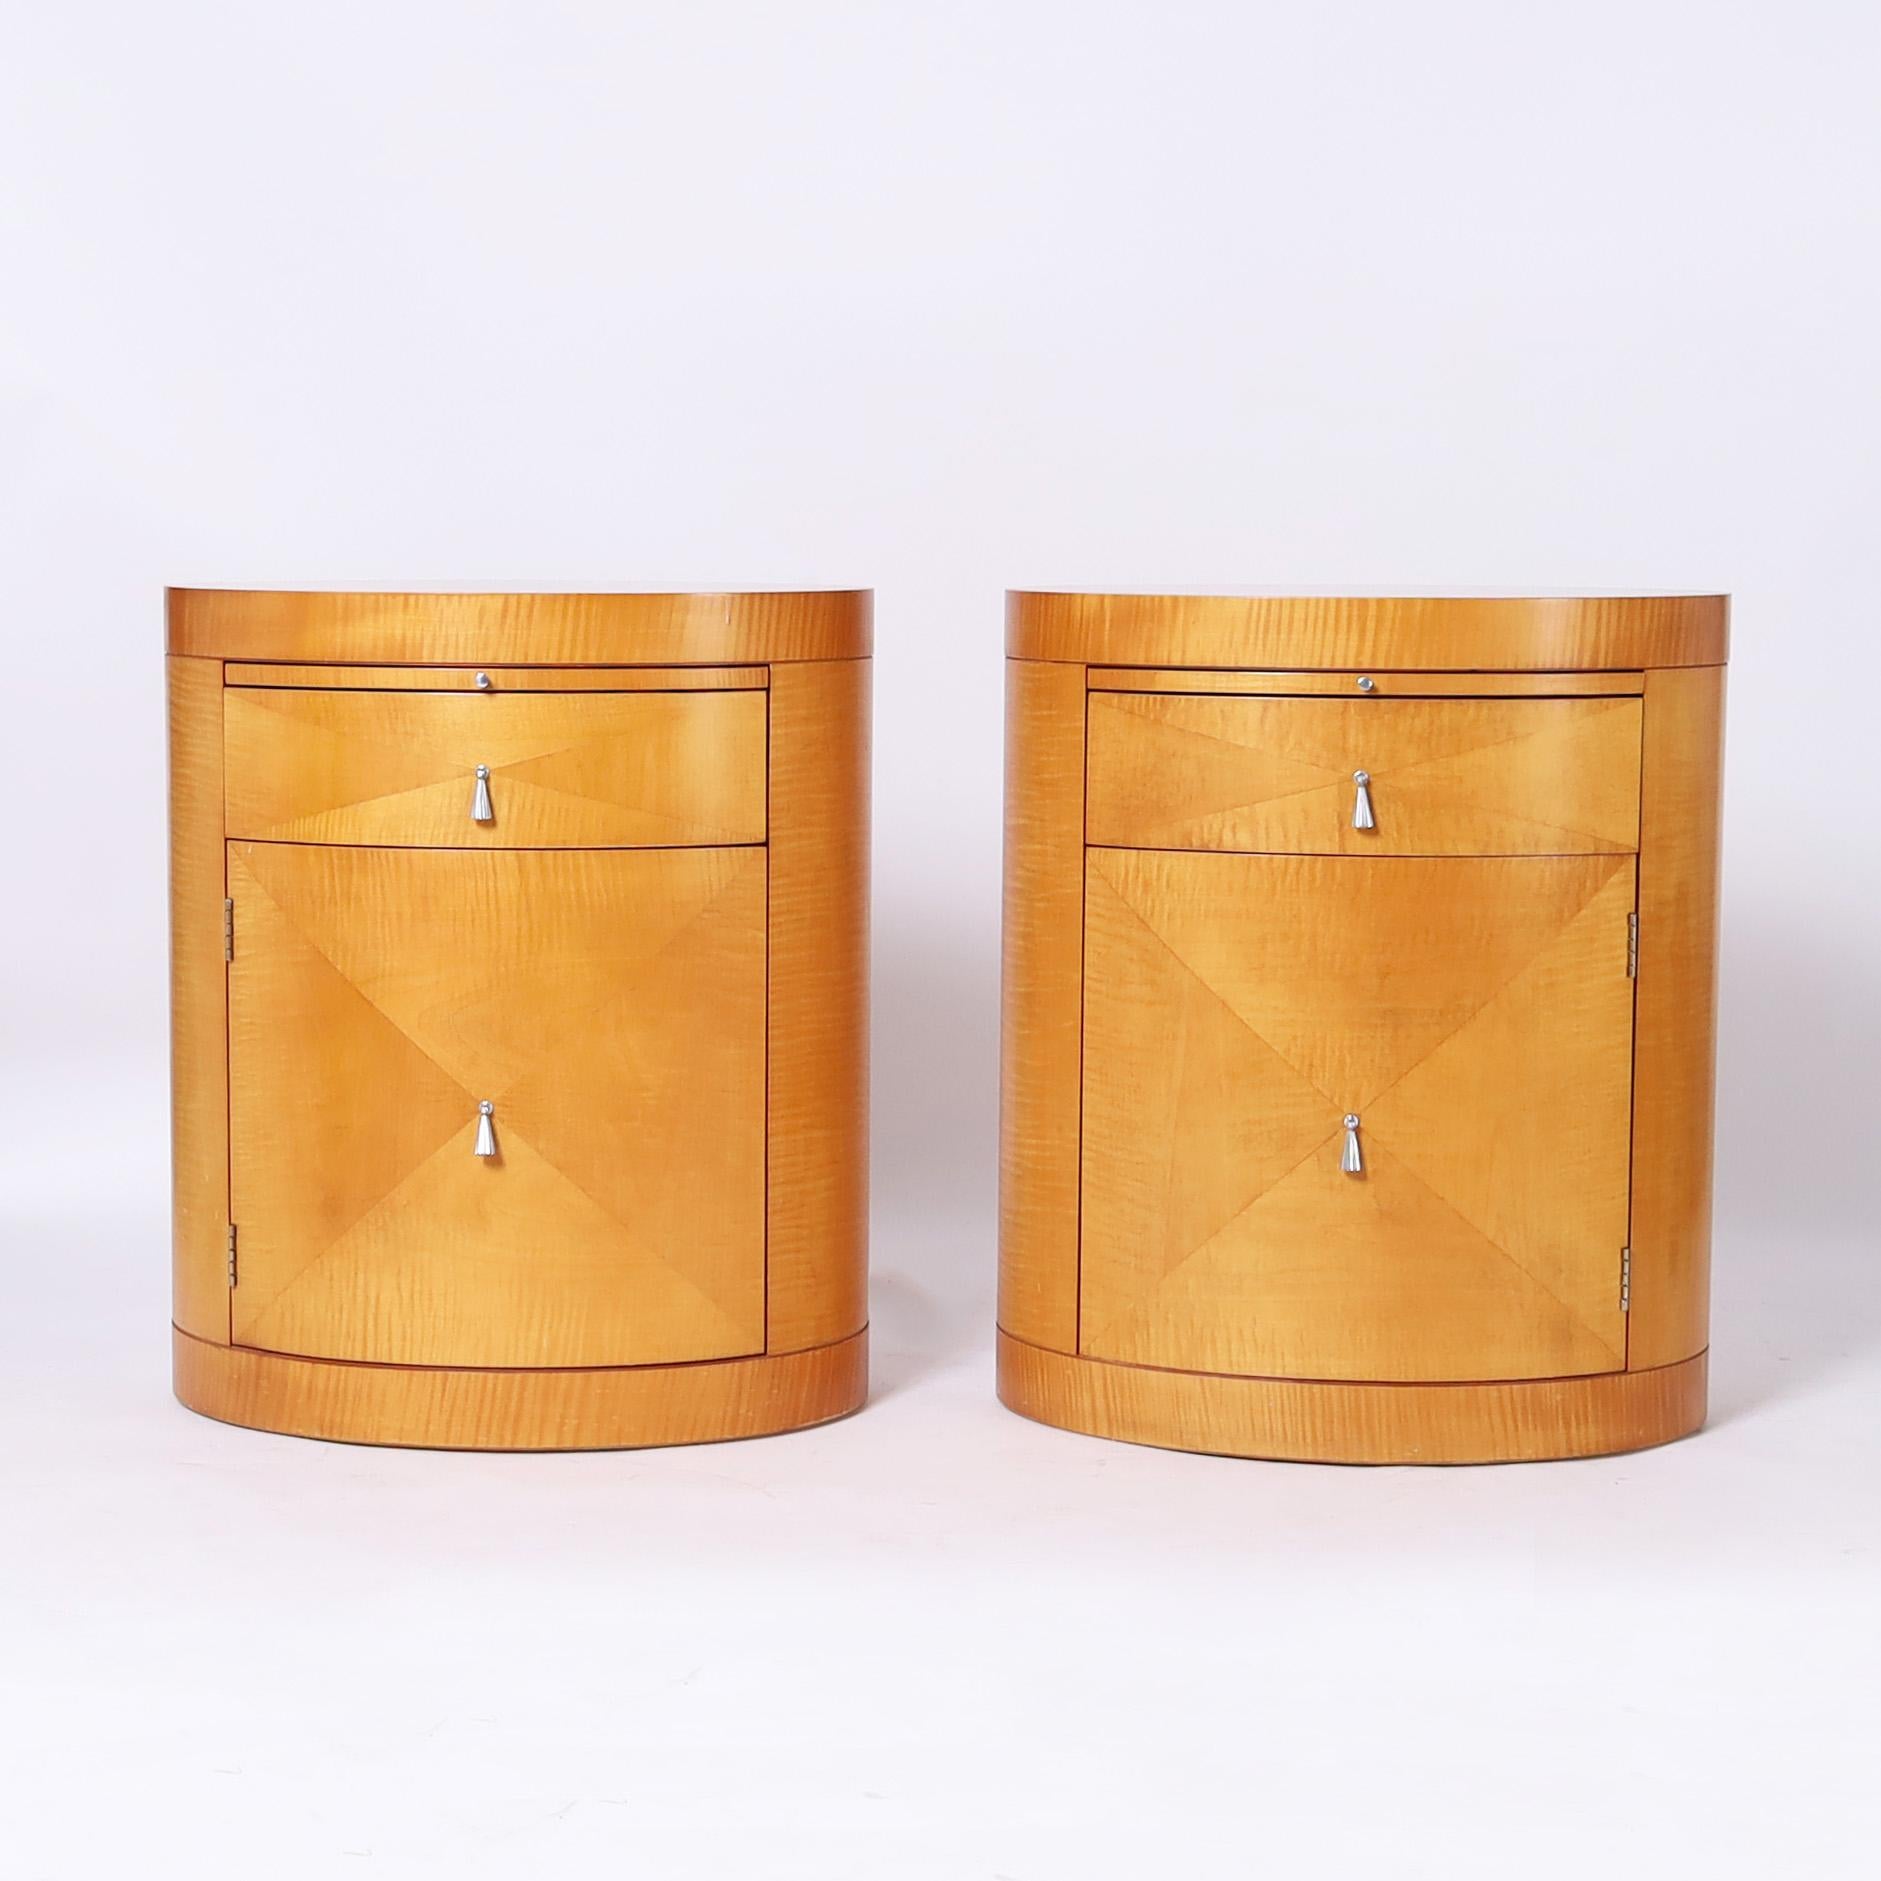 Impressive pair of vintage art deco inspired stands or tables crafted in satinwood in an oval drum form with a pullout tray over a drawer and cabinet door. Signed Baker silver label in a drawer.